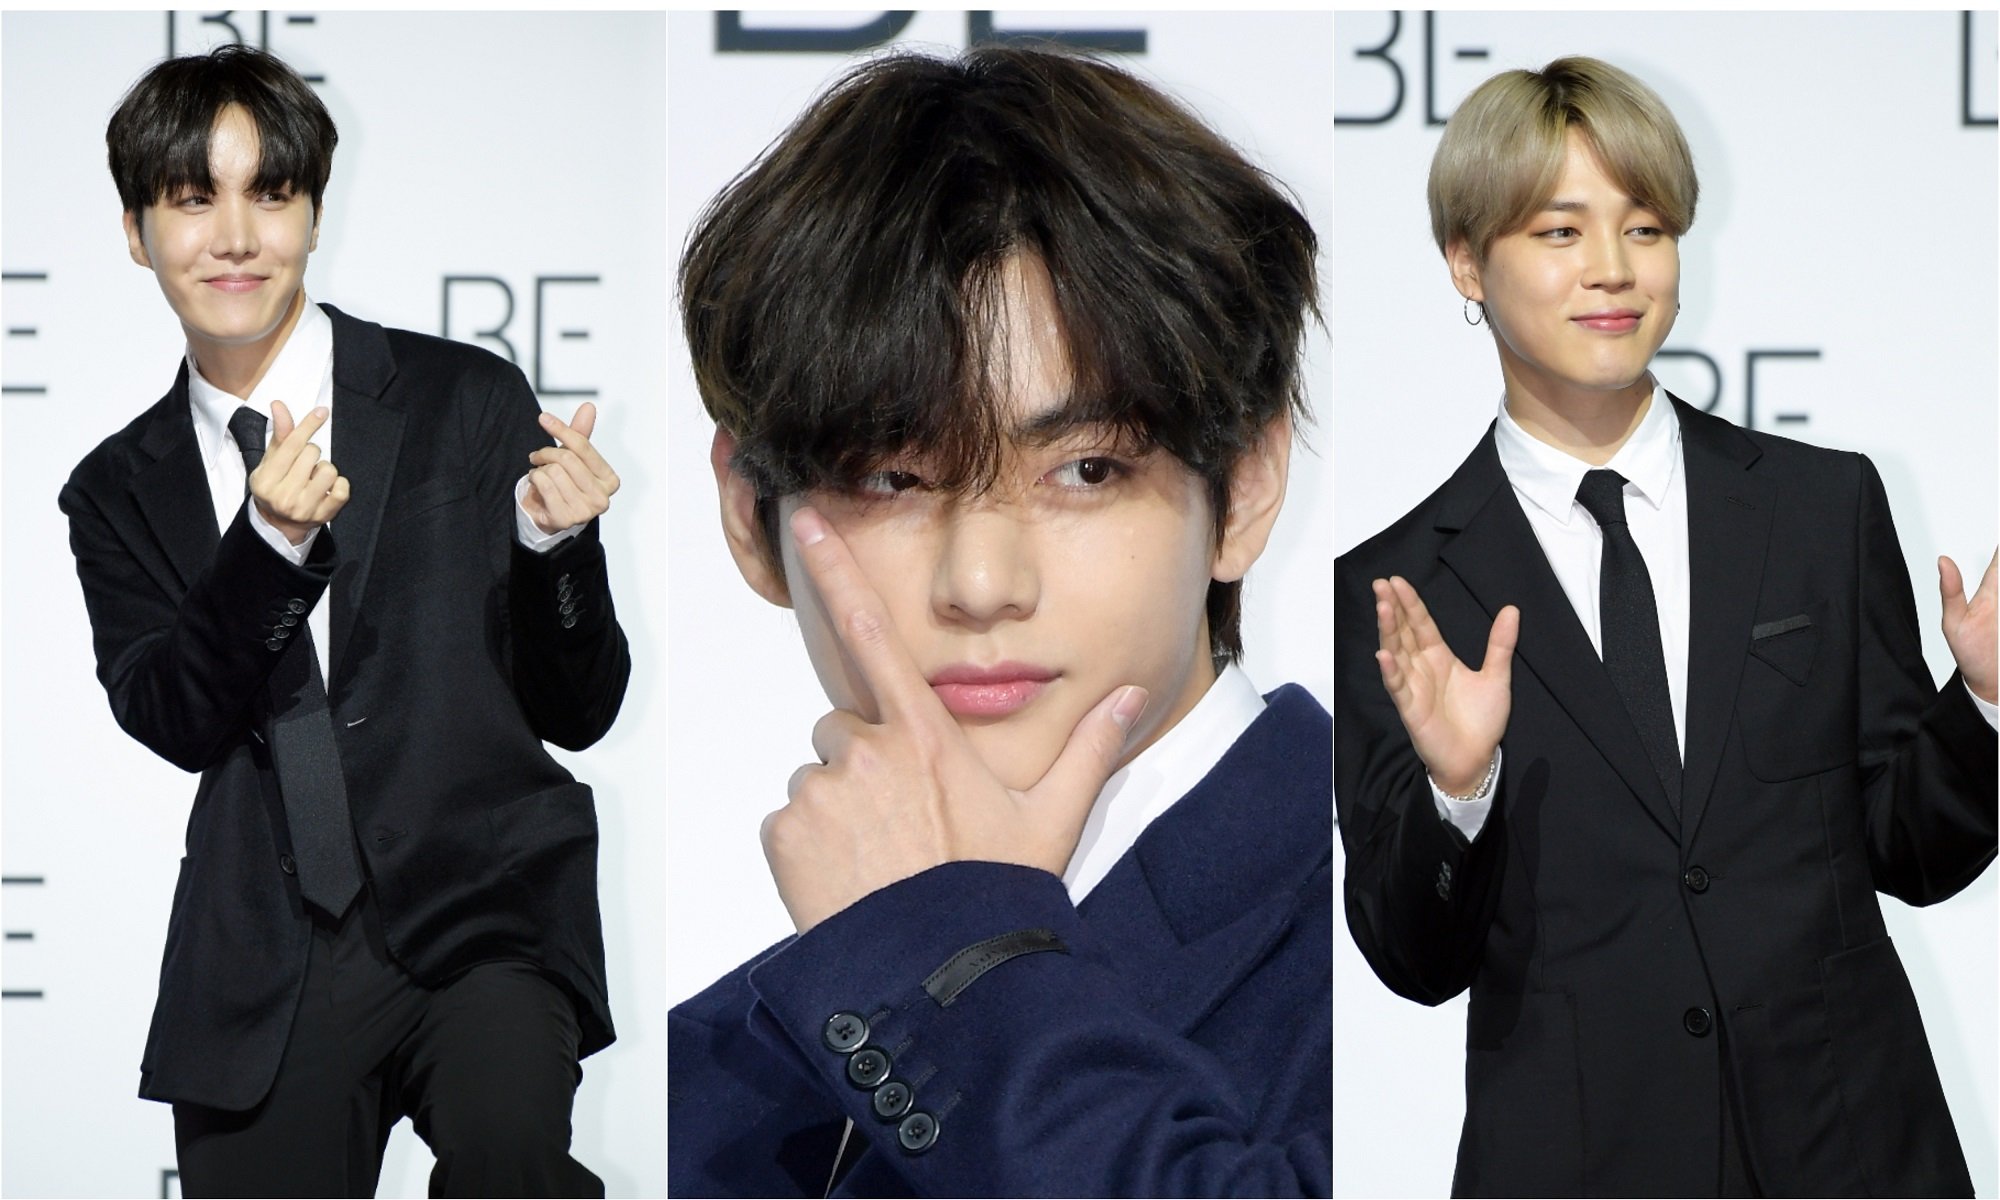 A joined photo of J-Hope, V, and Jimin of BTS at BTS' press conference for 'BE' in November 2020